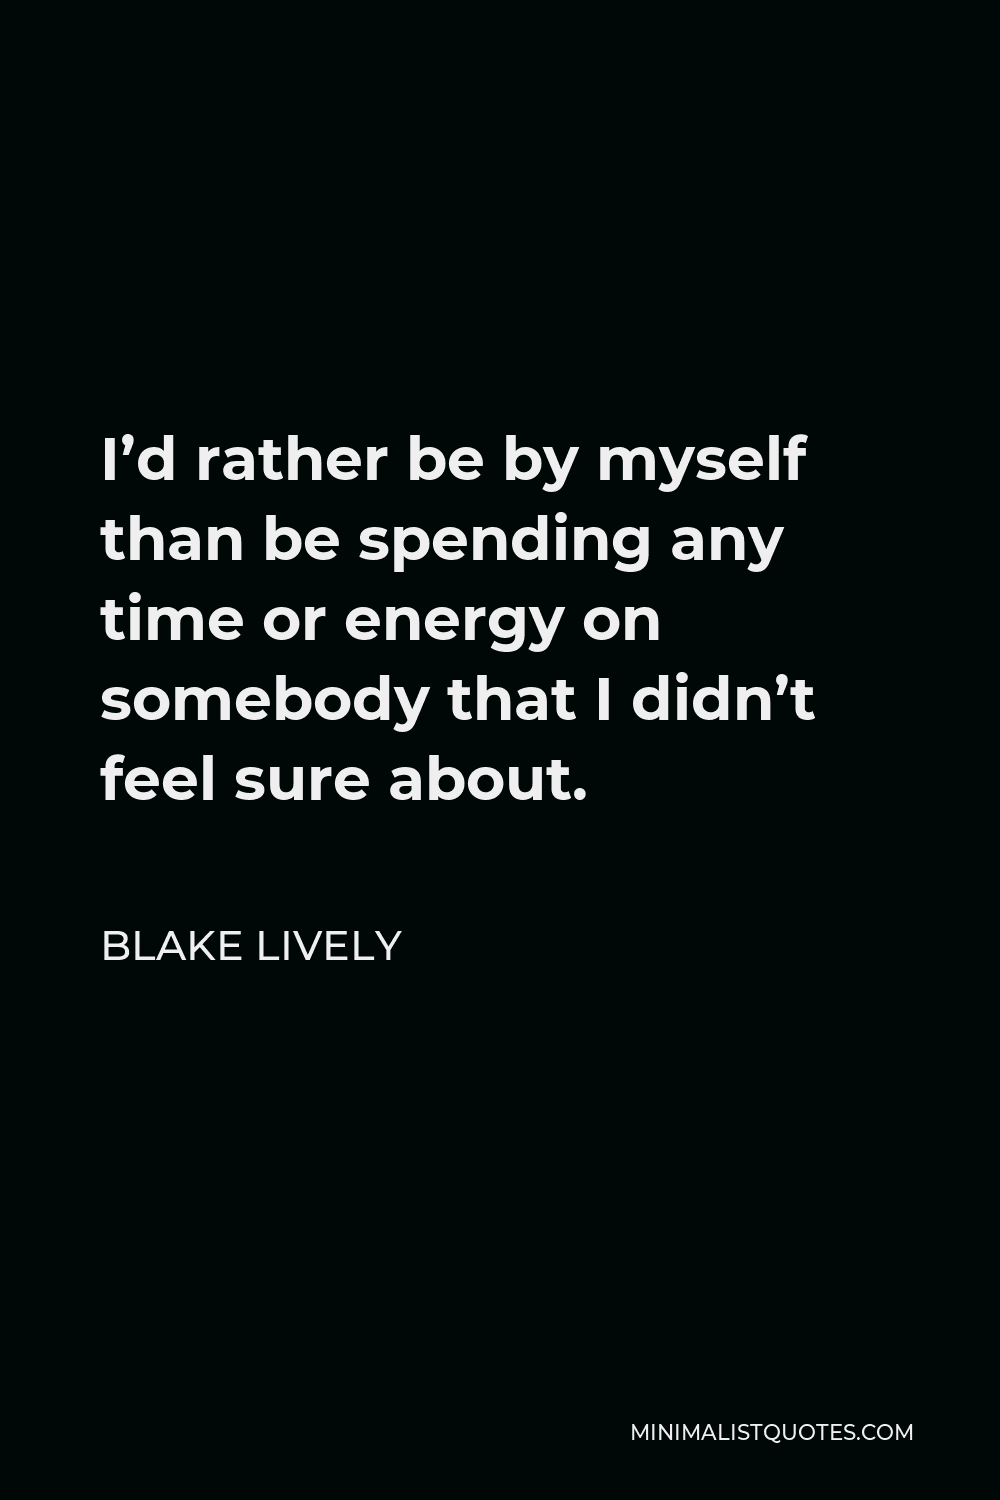 Blake Lively Quote - I’d rather be by myself than be spending any time or energy on somebody that I didn’t feel sure about.